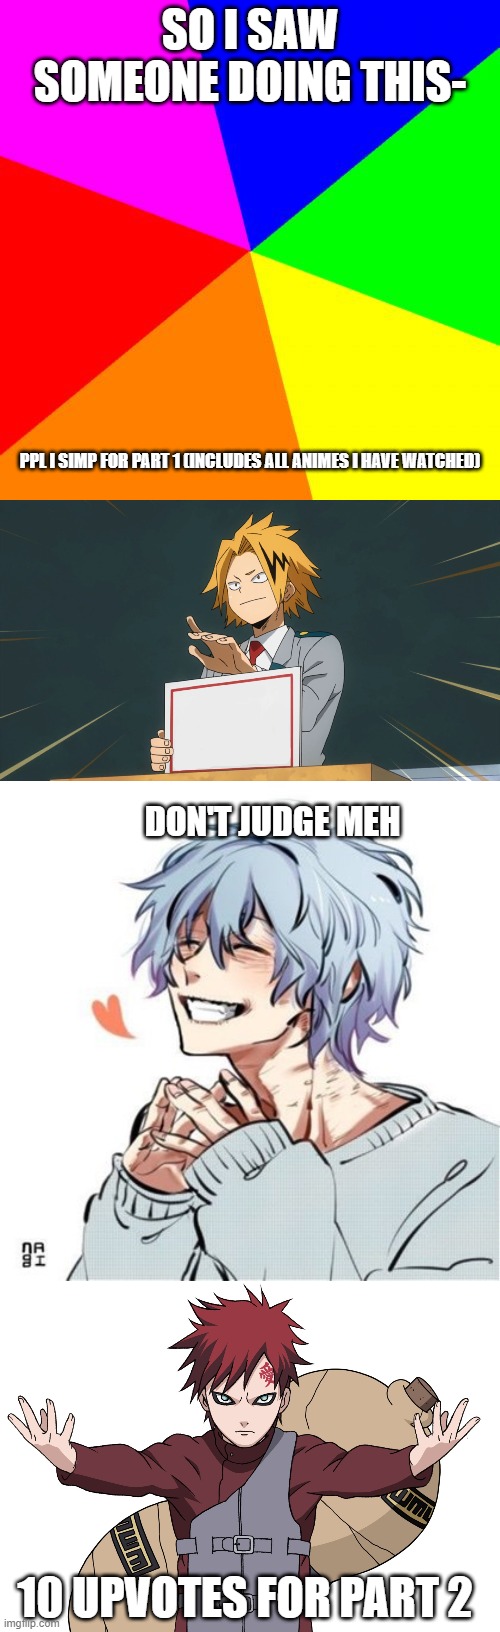 Don't judge meeeee | SO I SAW SOMEONE DOING THIS-; PPL I SIMP FOR PART 1 (INCLUDES ALL ANIMES I HAVE WATCHED); DON'T JUDGE MEH; 10 UPVOTES FOR PART 2 | image tagged in memes,blank colored background,denki holding sign,shigaraki,gaara | made w/ Imgflip meme maker